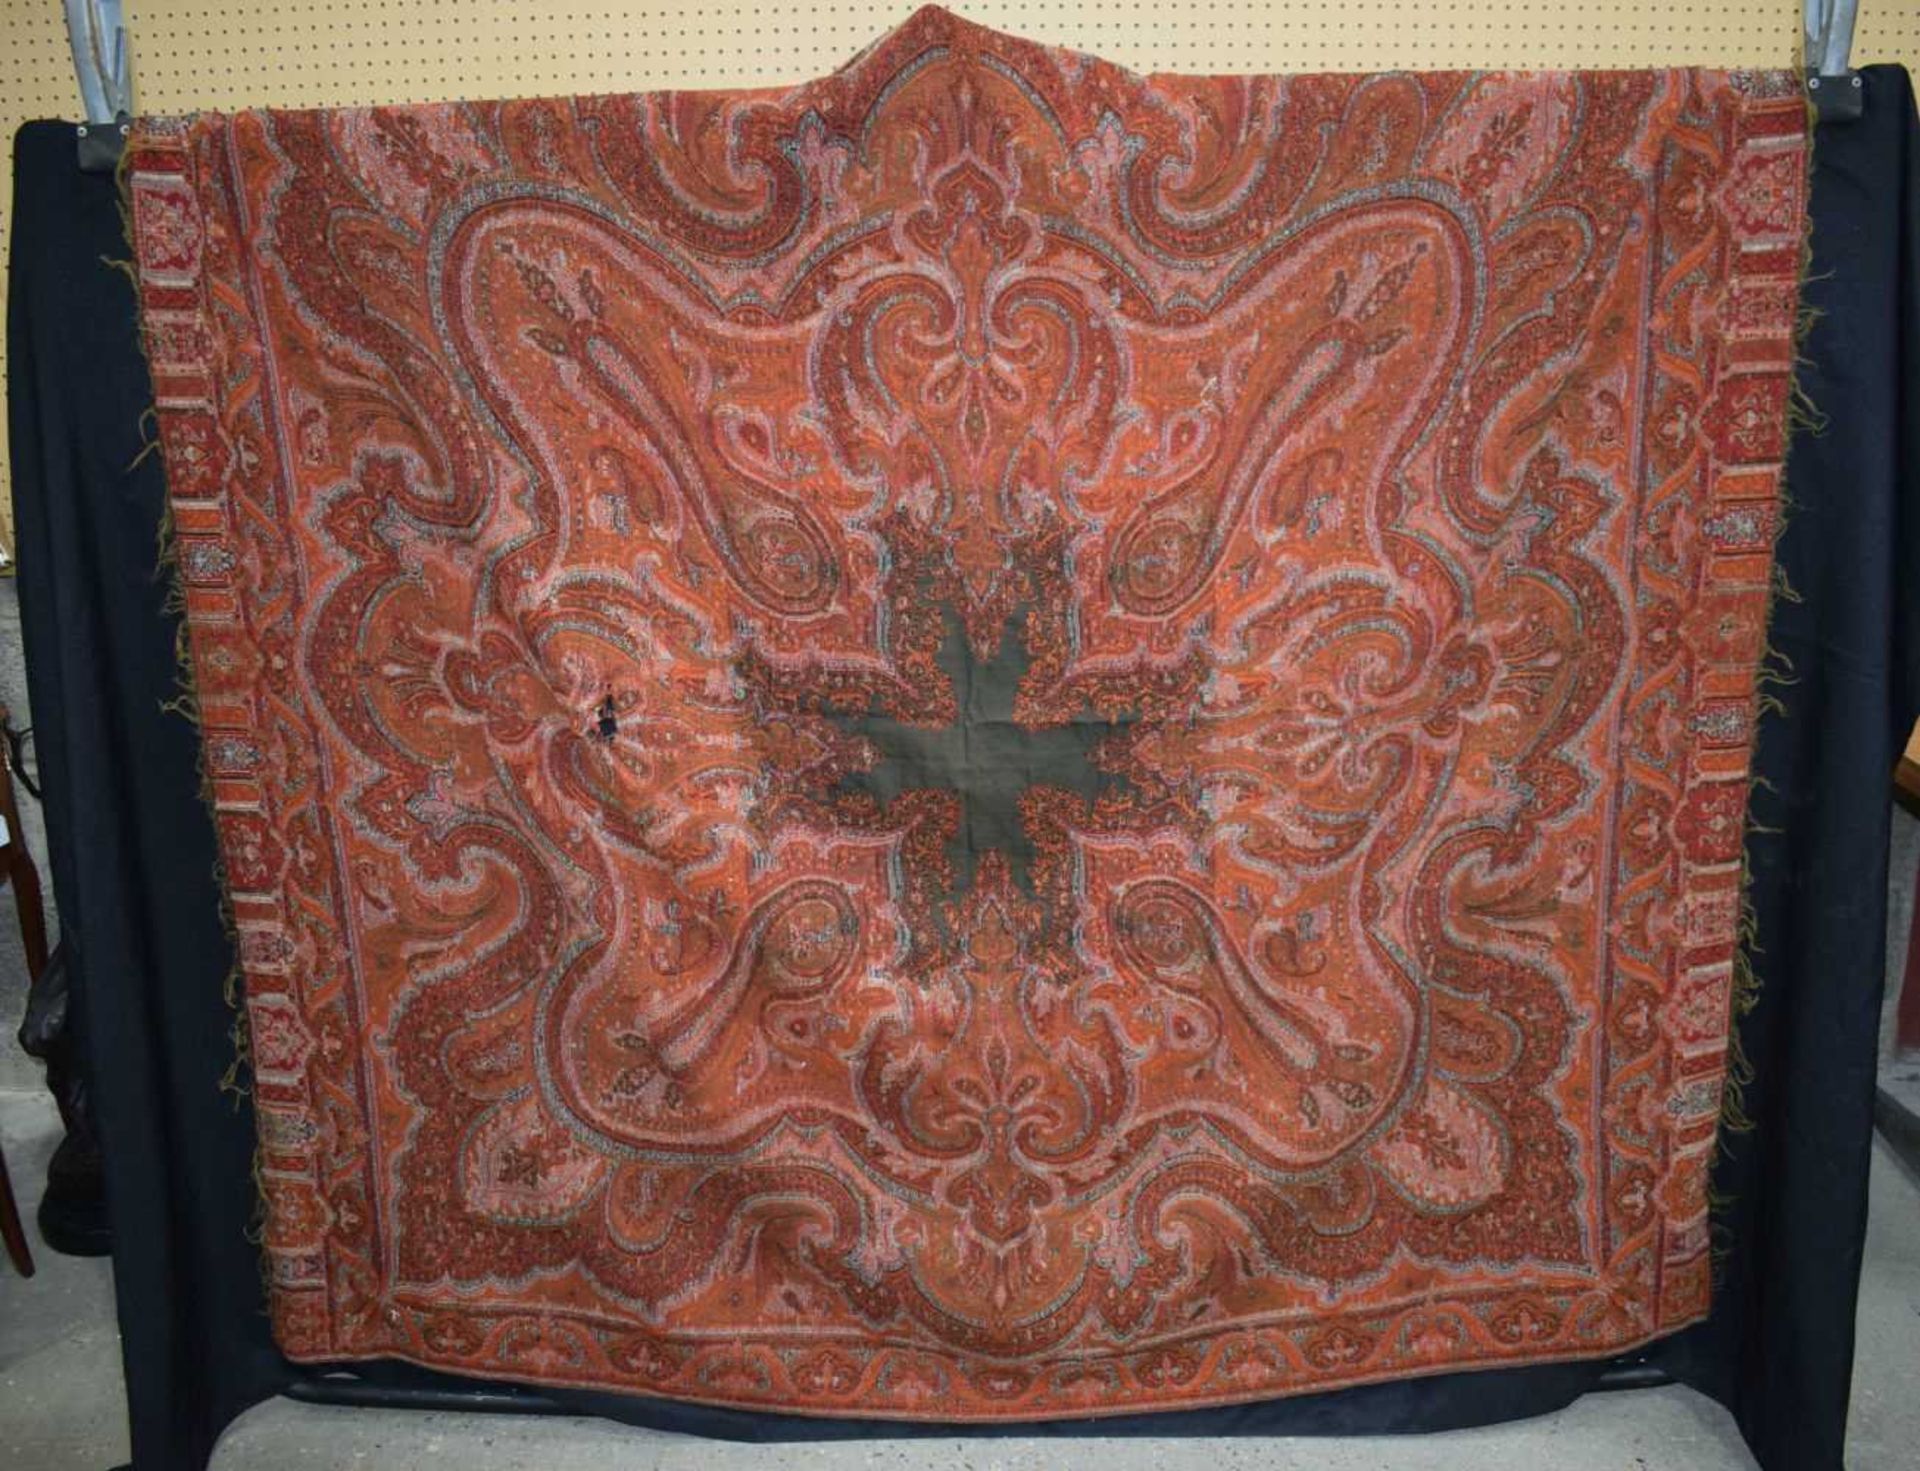 An antique Indian embroidered textile 140 x 140 cm - Image 5 of 10